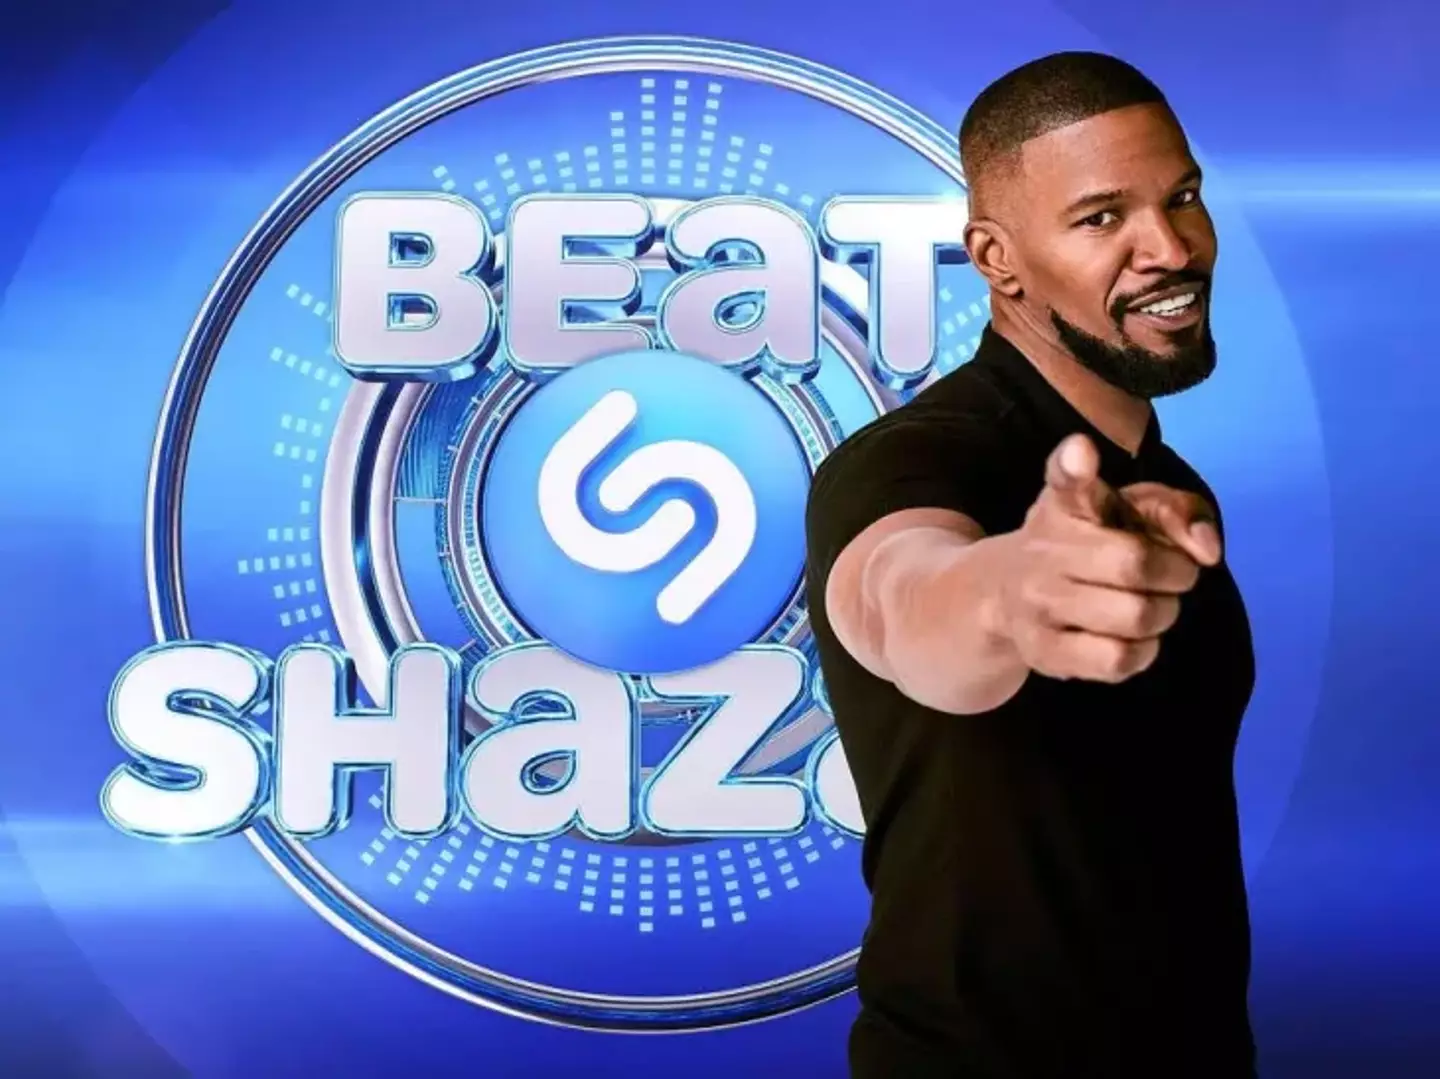 Jamie Foxx had to drop out of hosting Beat Shazam due to his hospitalisation.